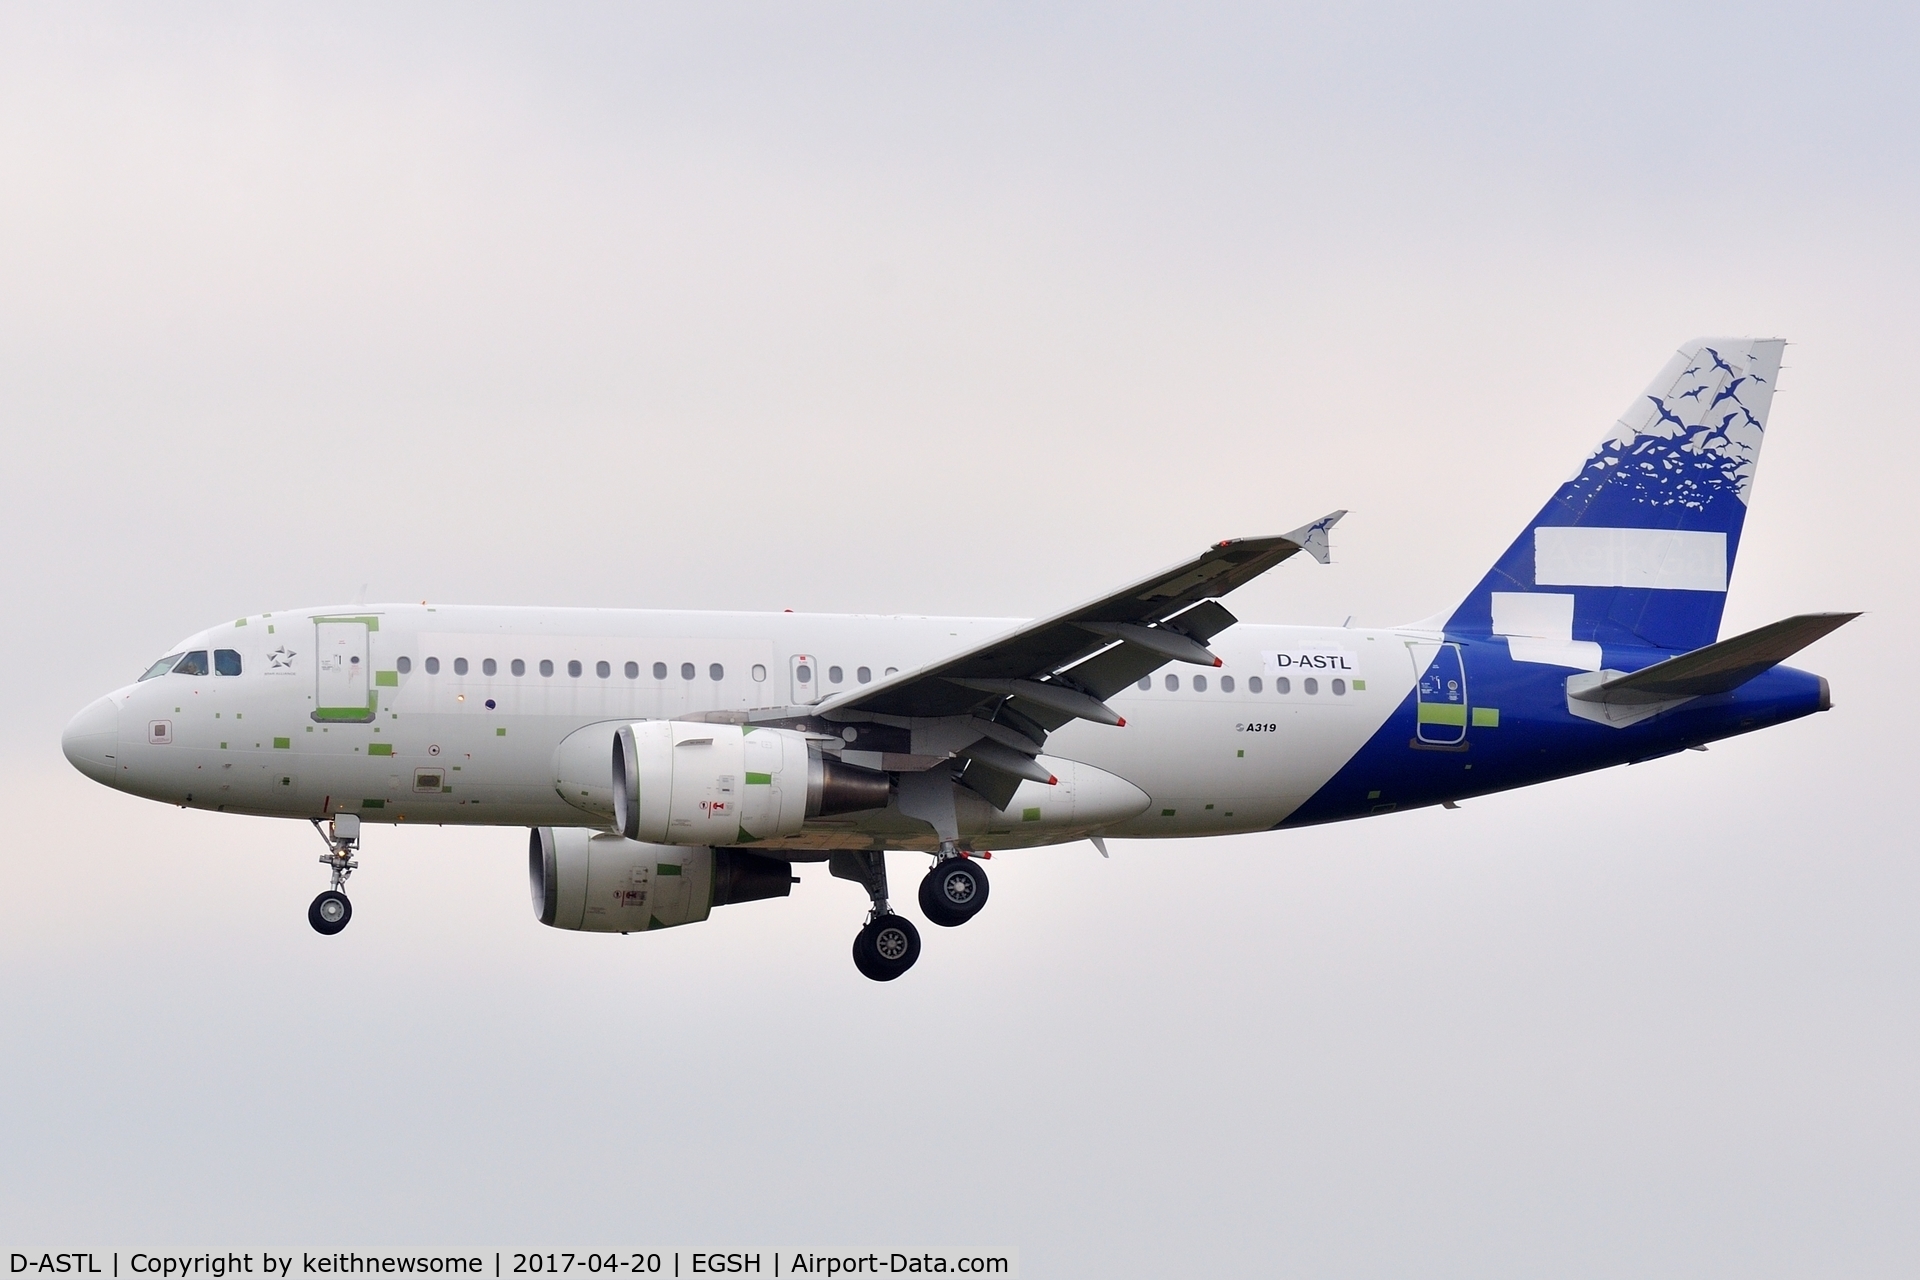 D-ASTL, 2003 Airbus A319-112 C/N 1925, Formerly HC-CKO (VP-GYC) showing partial AeroGal colour scheme for paint to Germania.